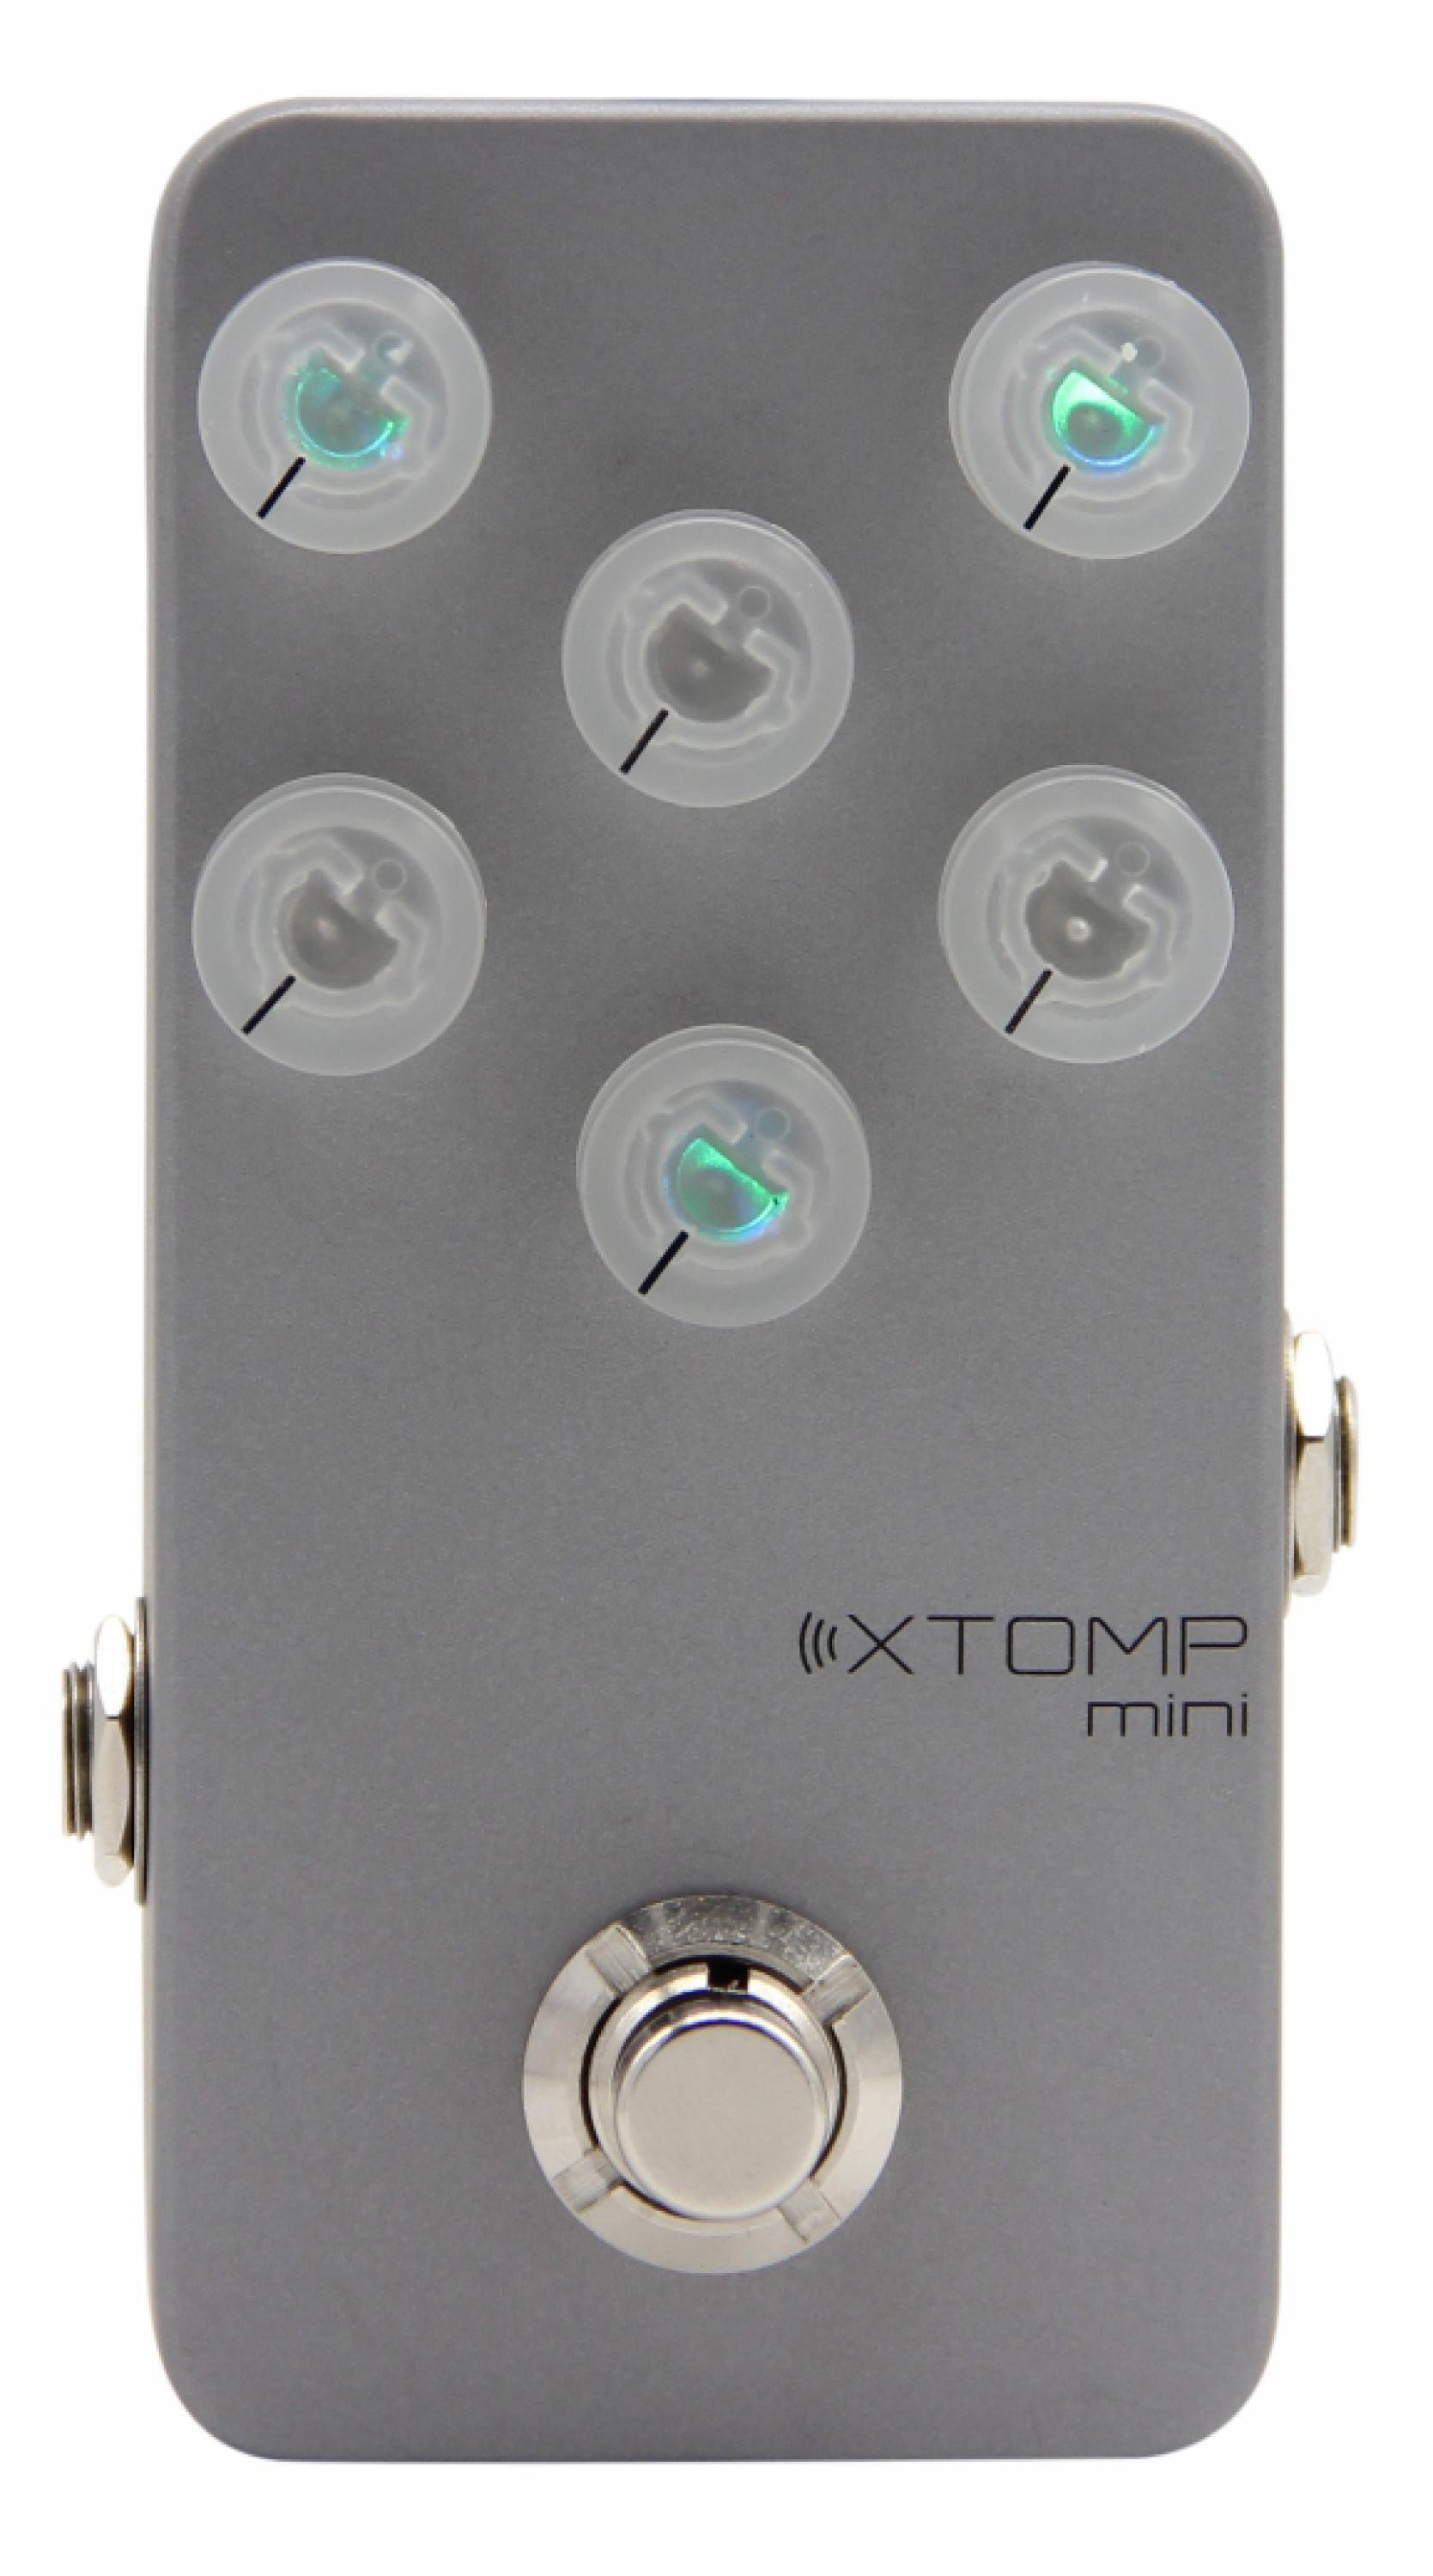 Hotone XTOMP Mini Bluetooth Modeling Effects Pedal | Sweetwater